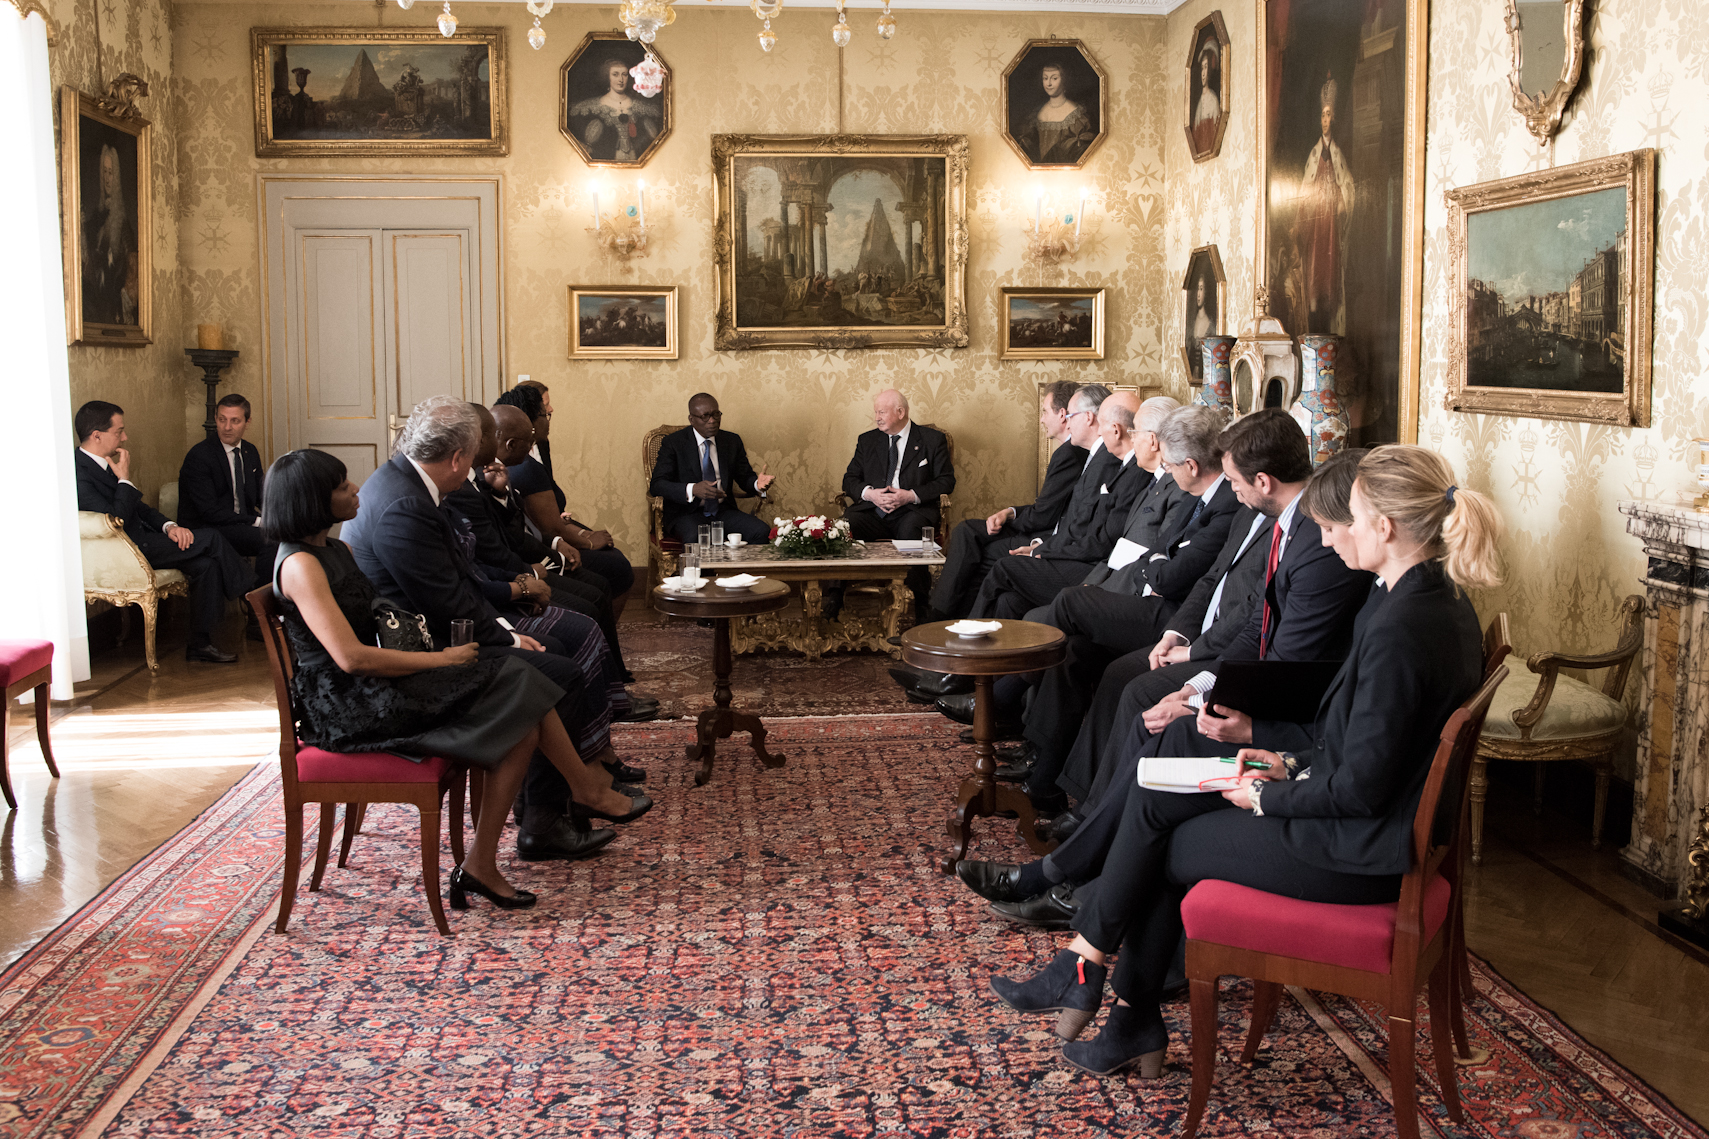 The Grand Master receives the President of Benin on an official visit